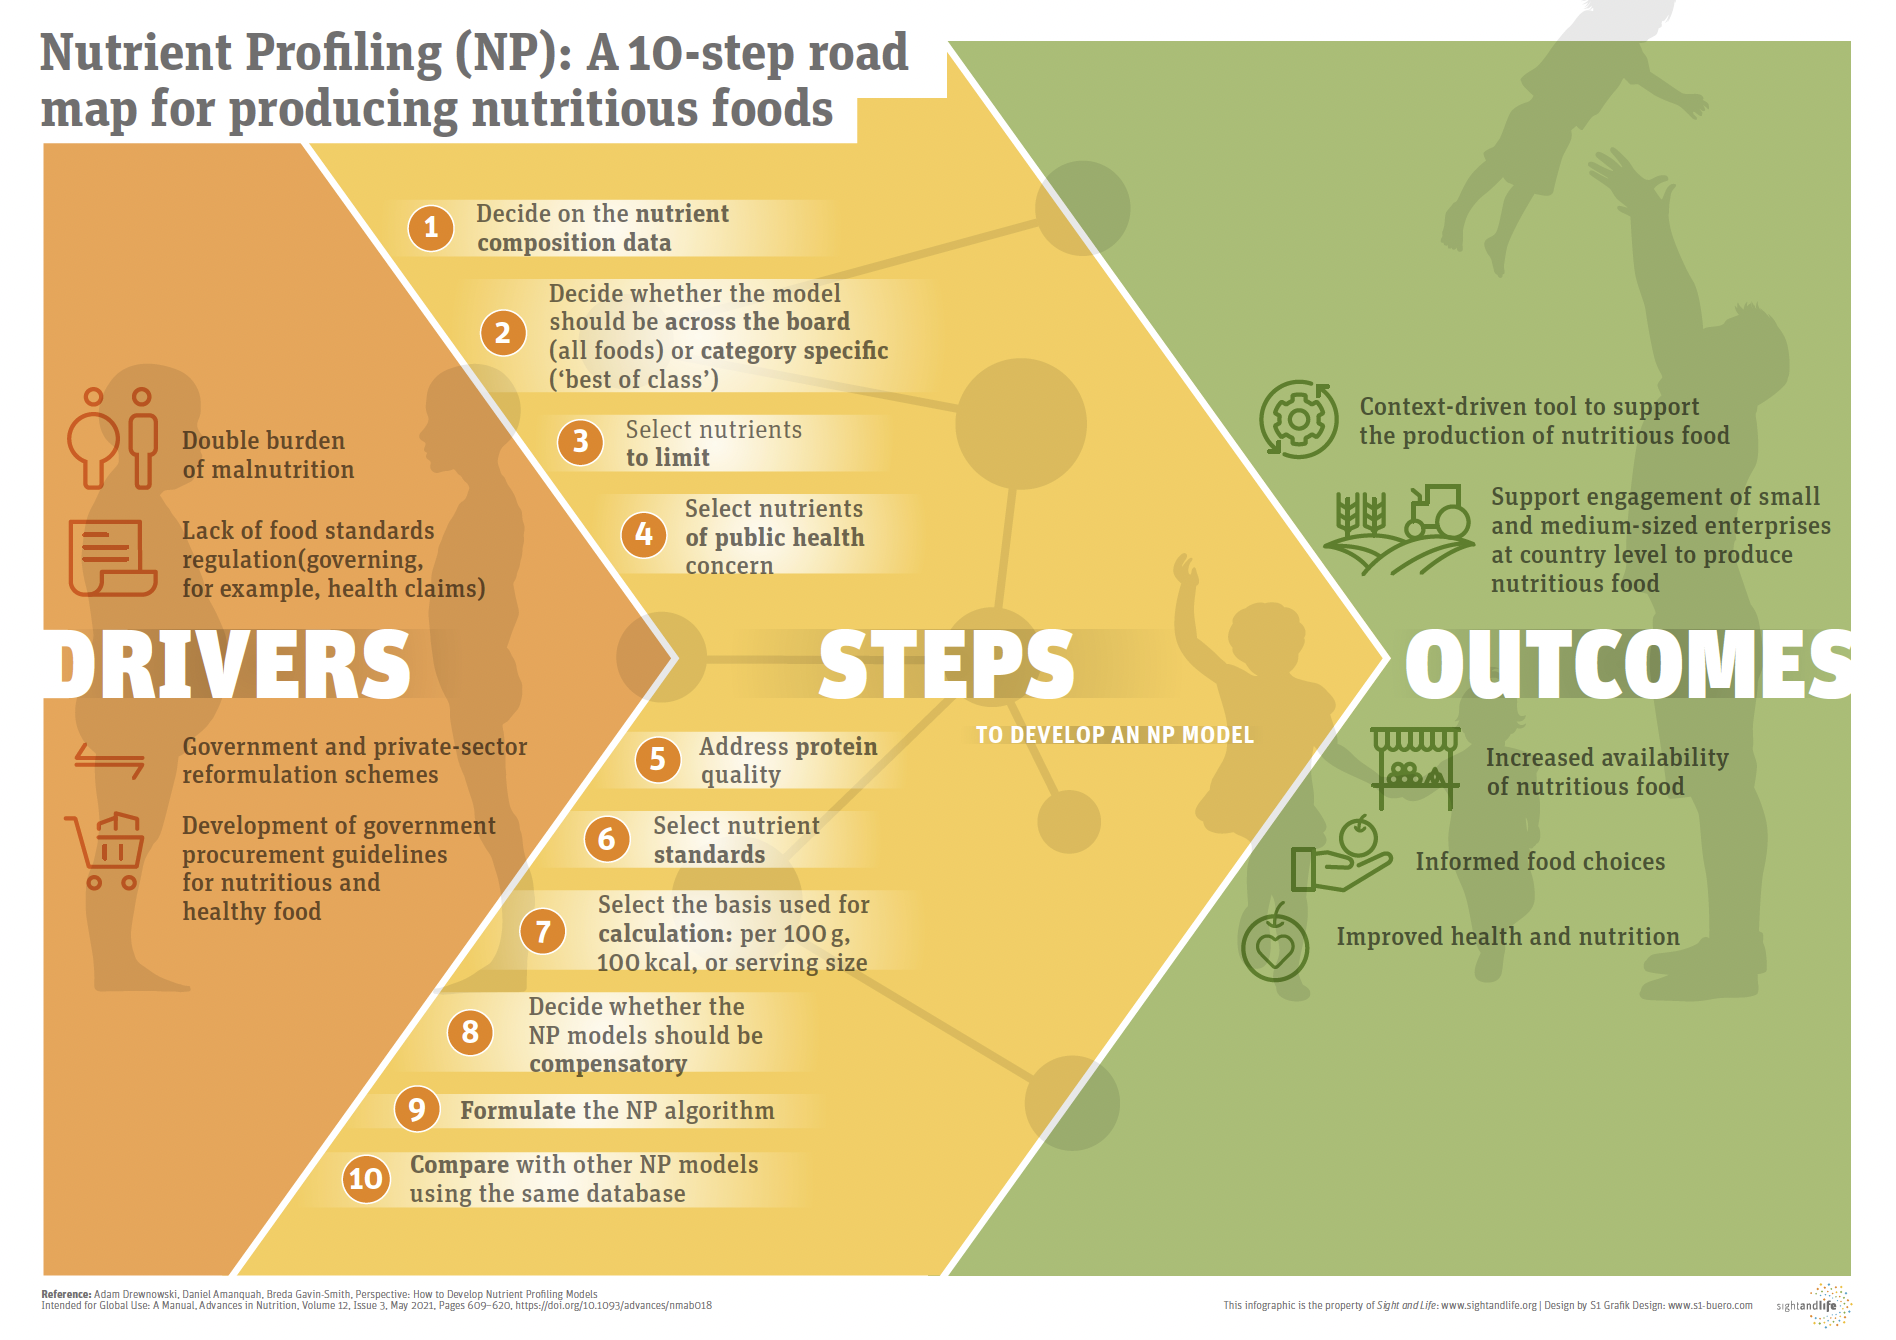 Nutrient Profiling: A 10-step road map for producing nutritious foods